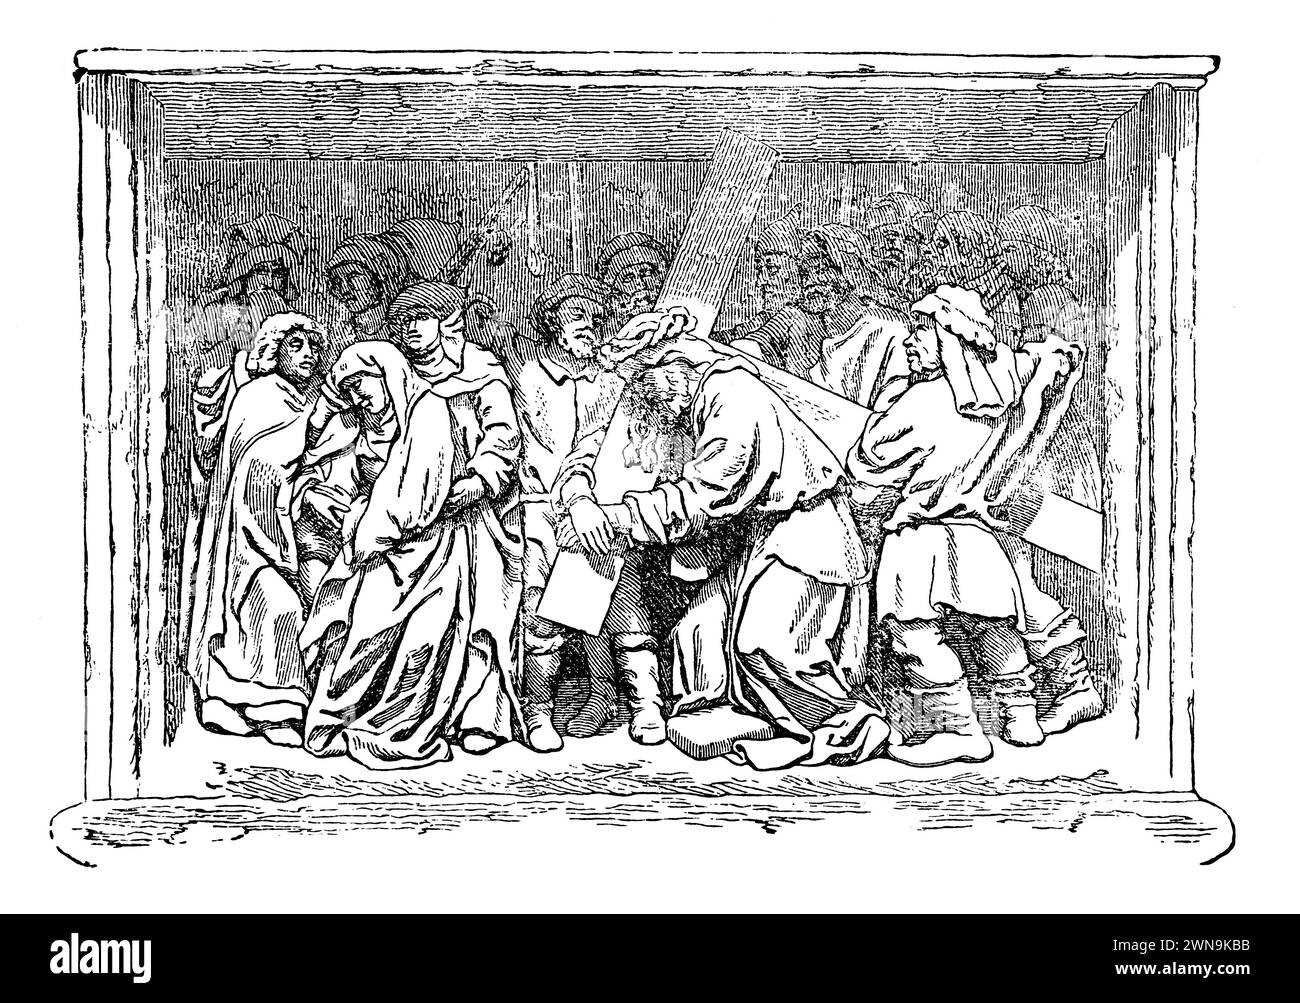 Station of the Cross: Via Dolorosa: Engraving from Lives of the Saints by the Reverend Sabin Baring-Gould, published 1898 Stock Photo